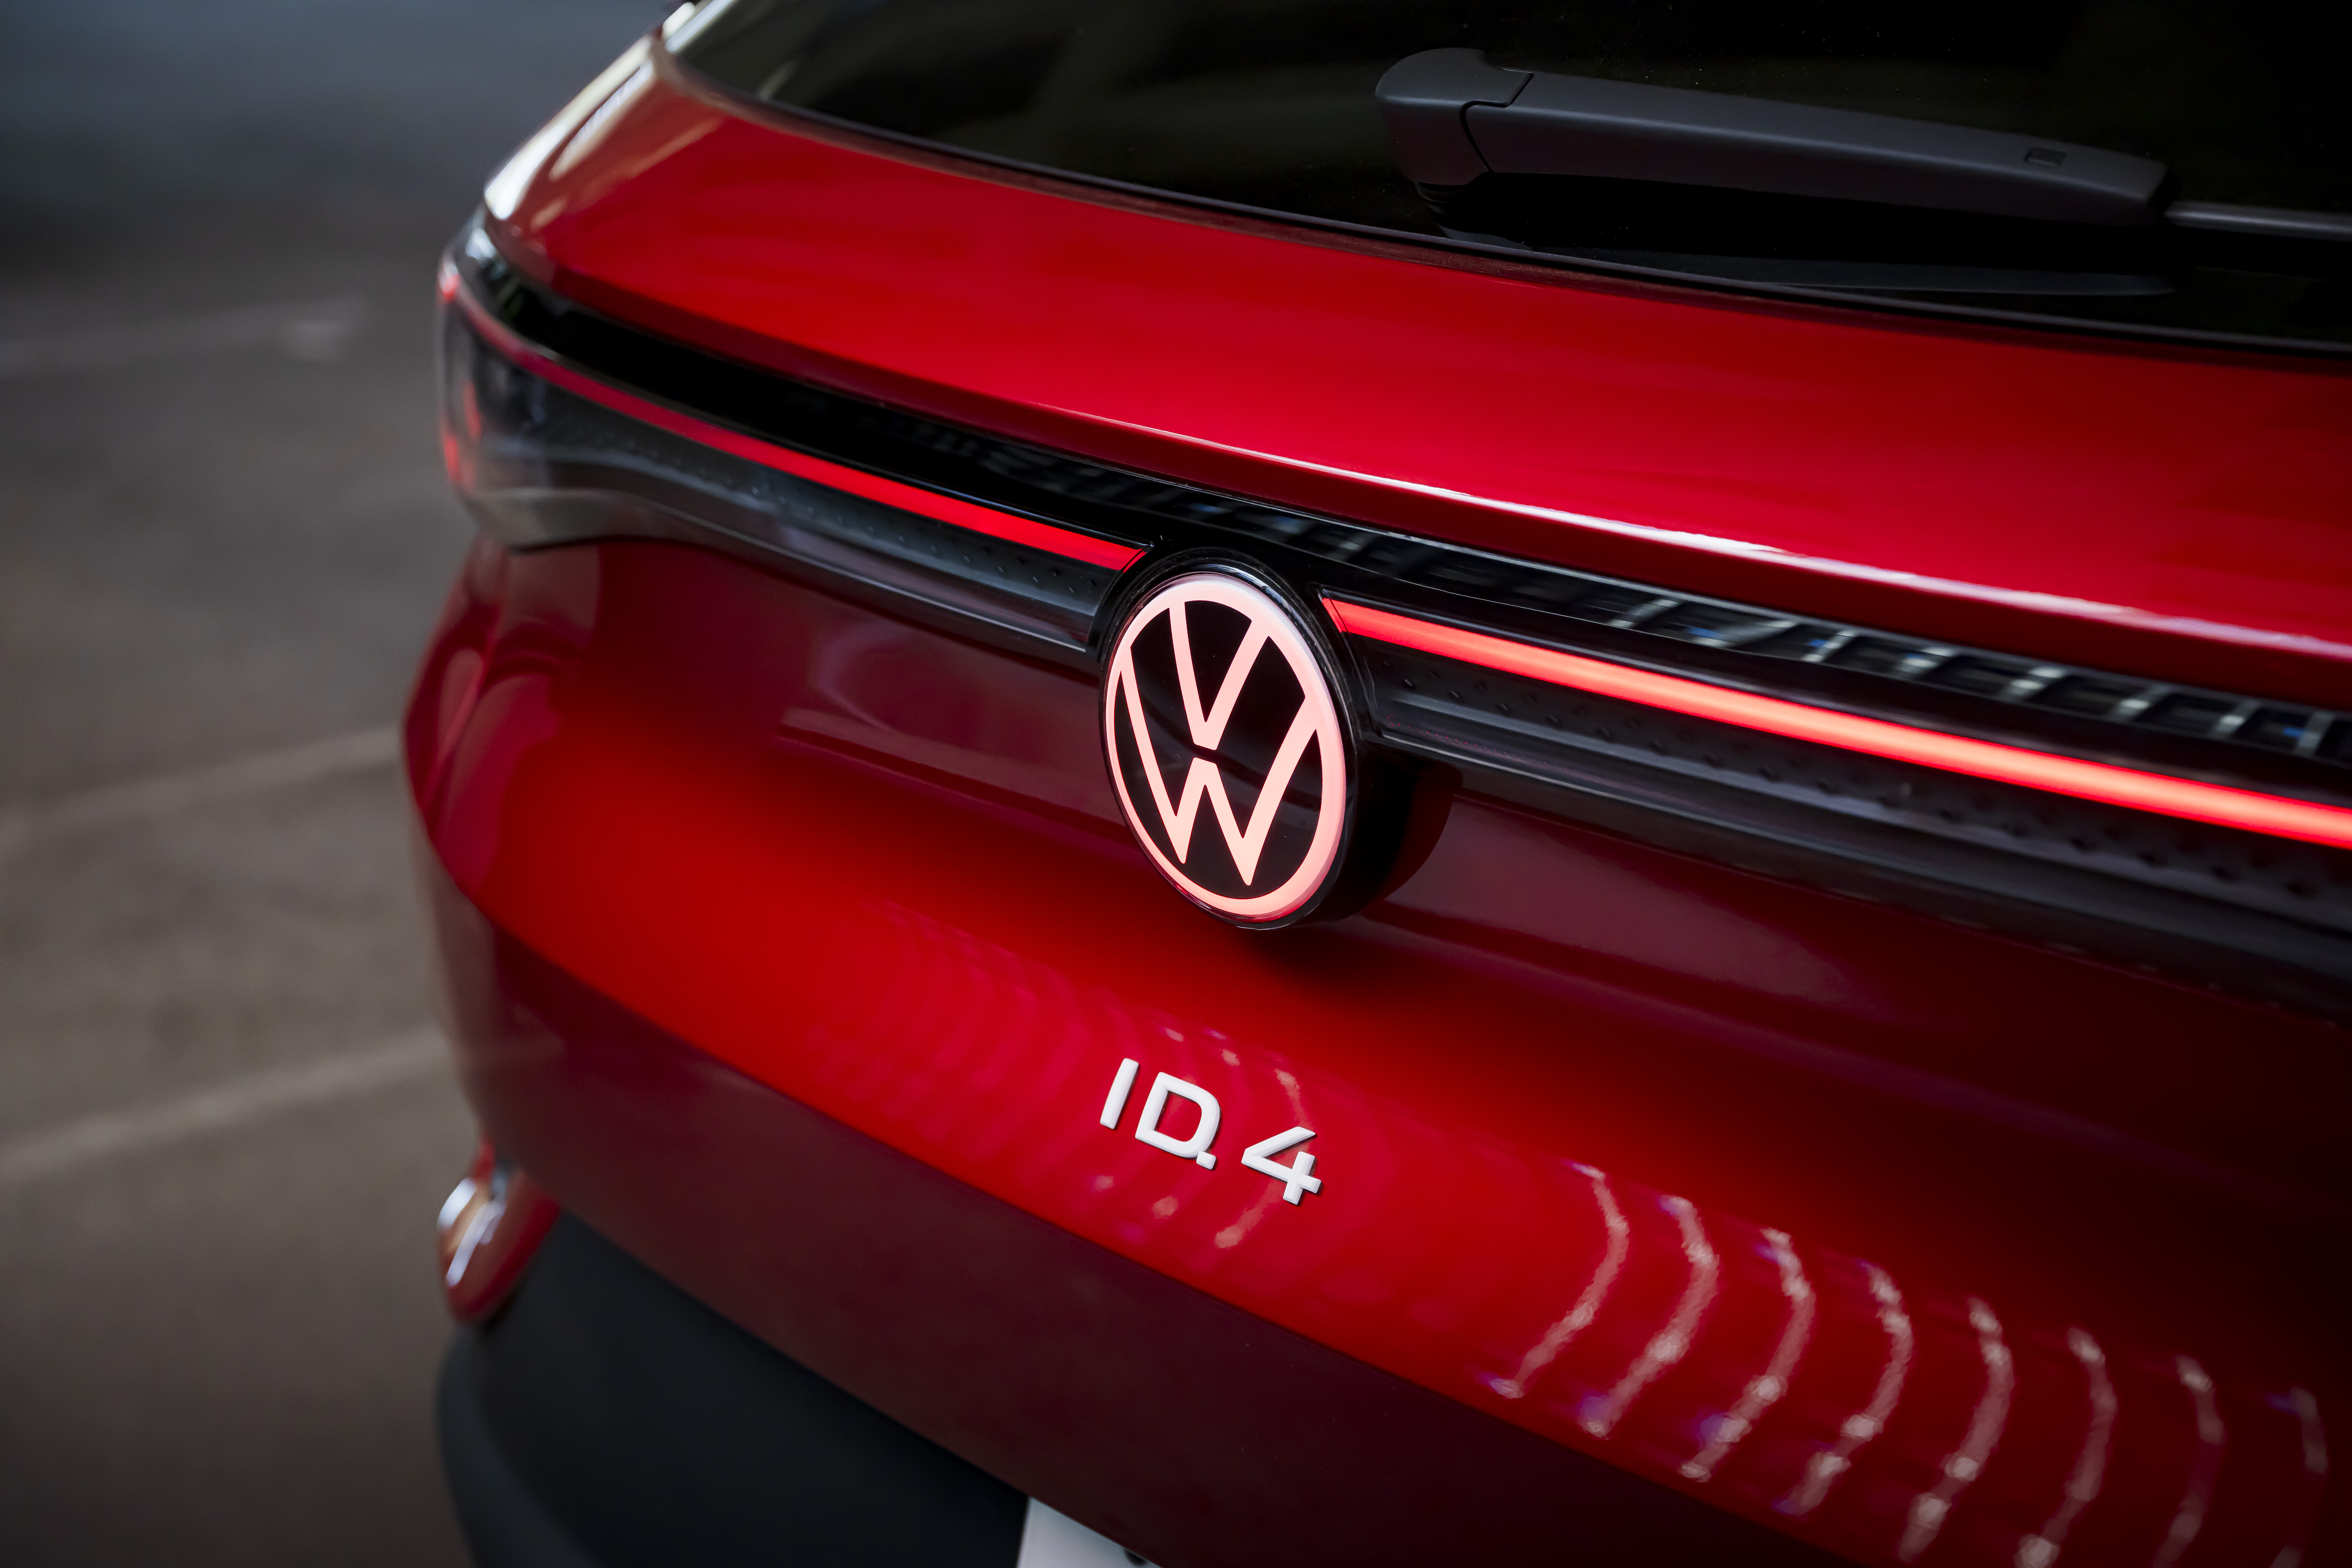 VW reaches its global sales goal for EVs early